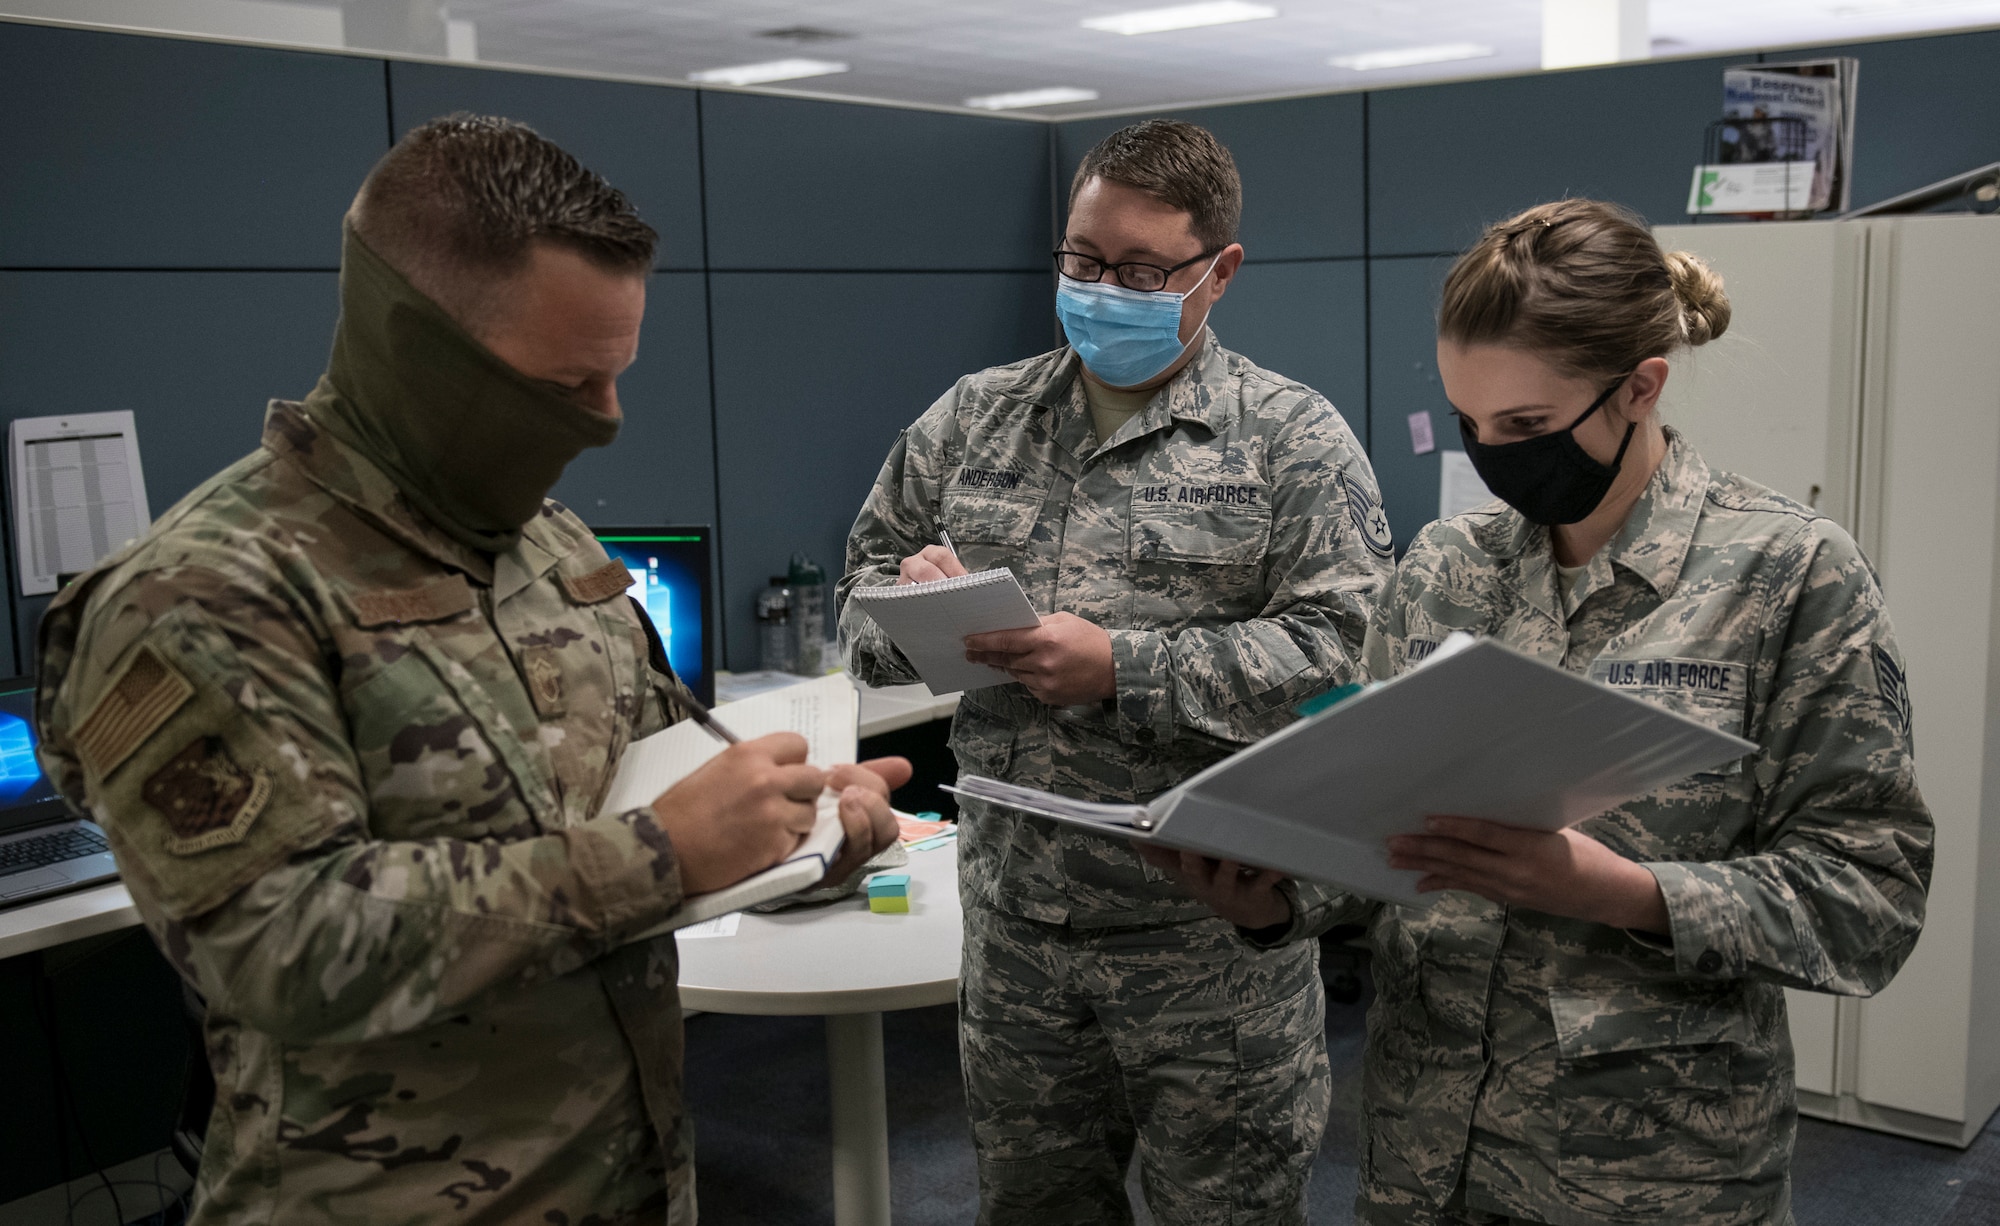 Master Sgt. Nathan Sigars, 419th Inspector General superintendent, reviews notes with personnel from the Education and Training Flight during a no-notice inspection